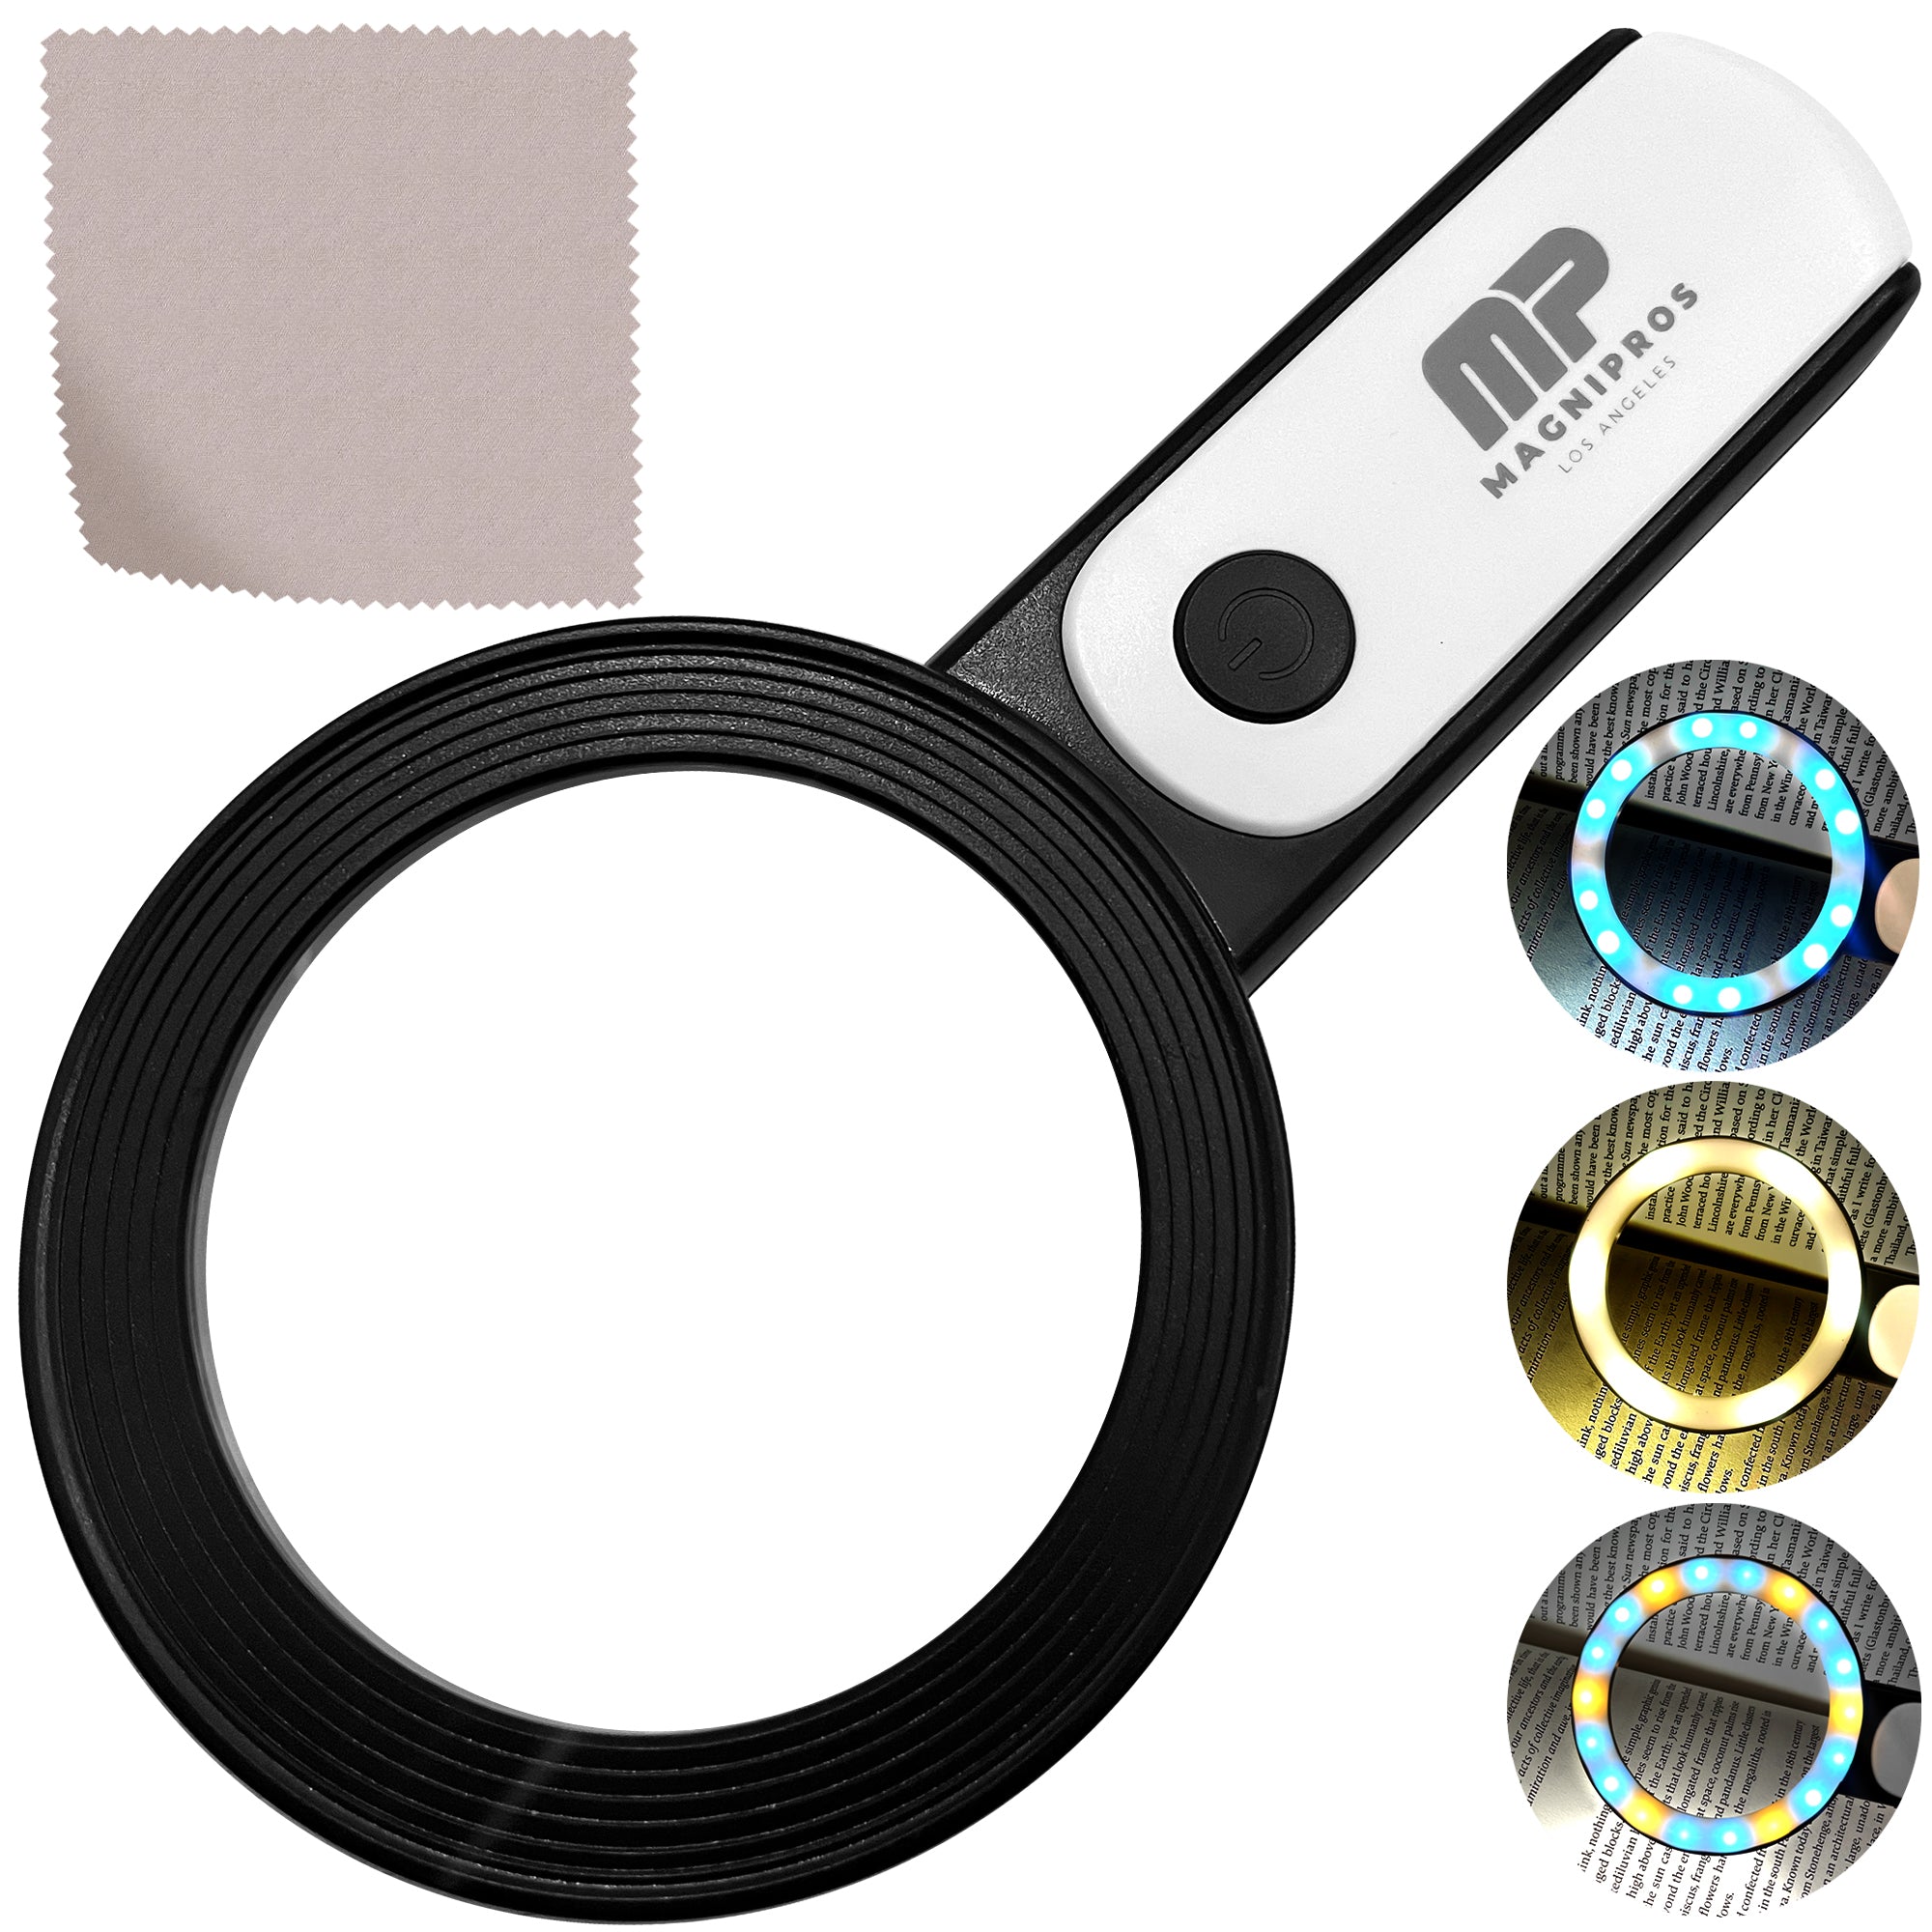 30X Professional Jewelry Magnifier, Optical Jewelry Magnifier